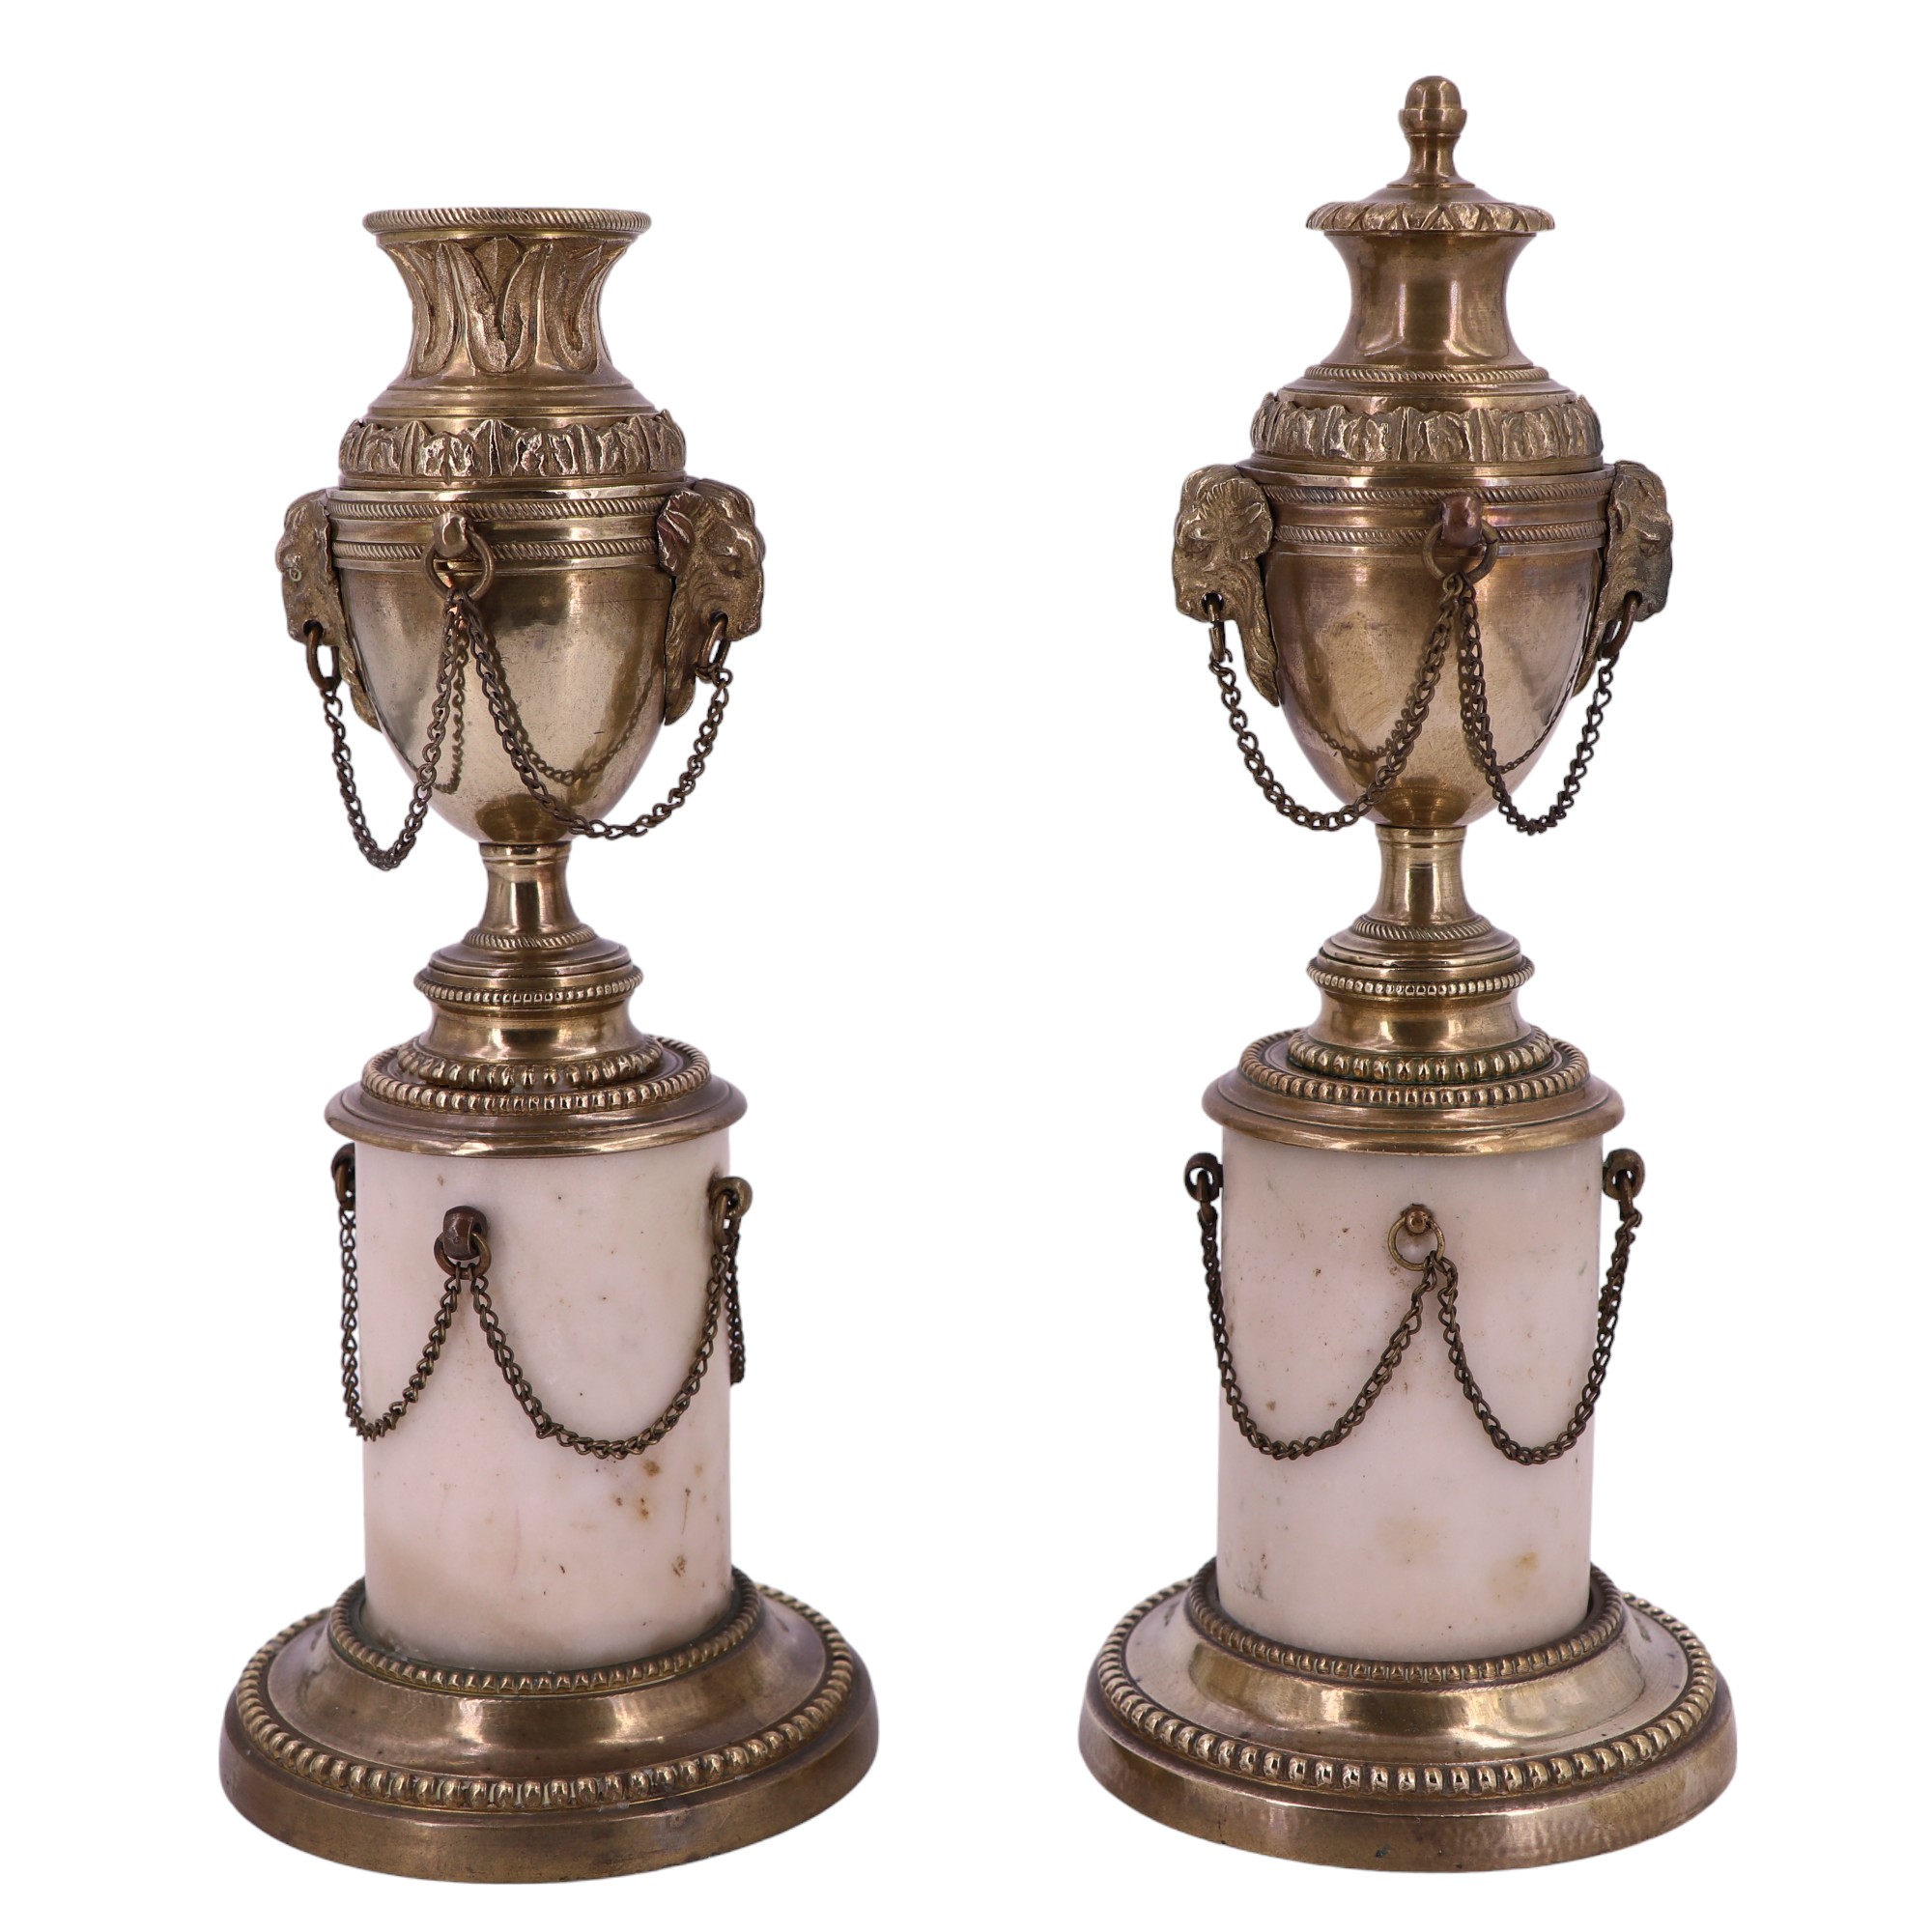 A pair of Louis XVI style brass and alabaster columnar candlesticks, each in the form of an